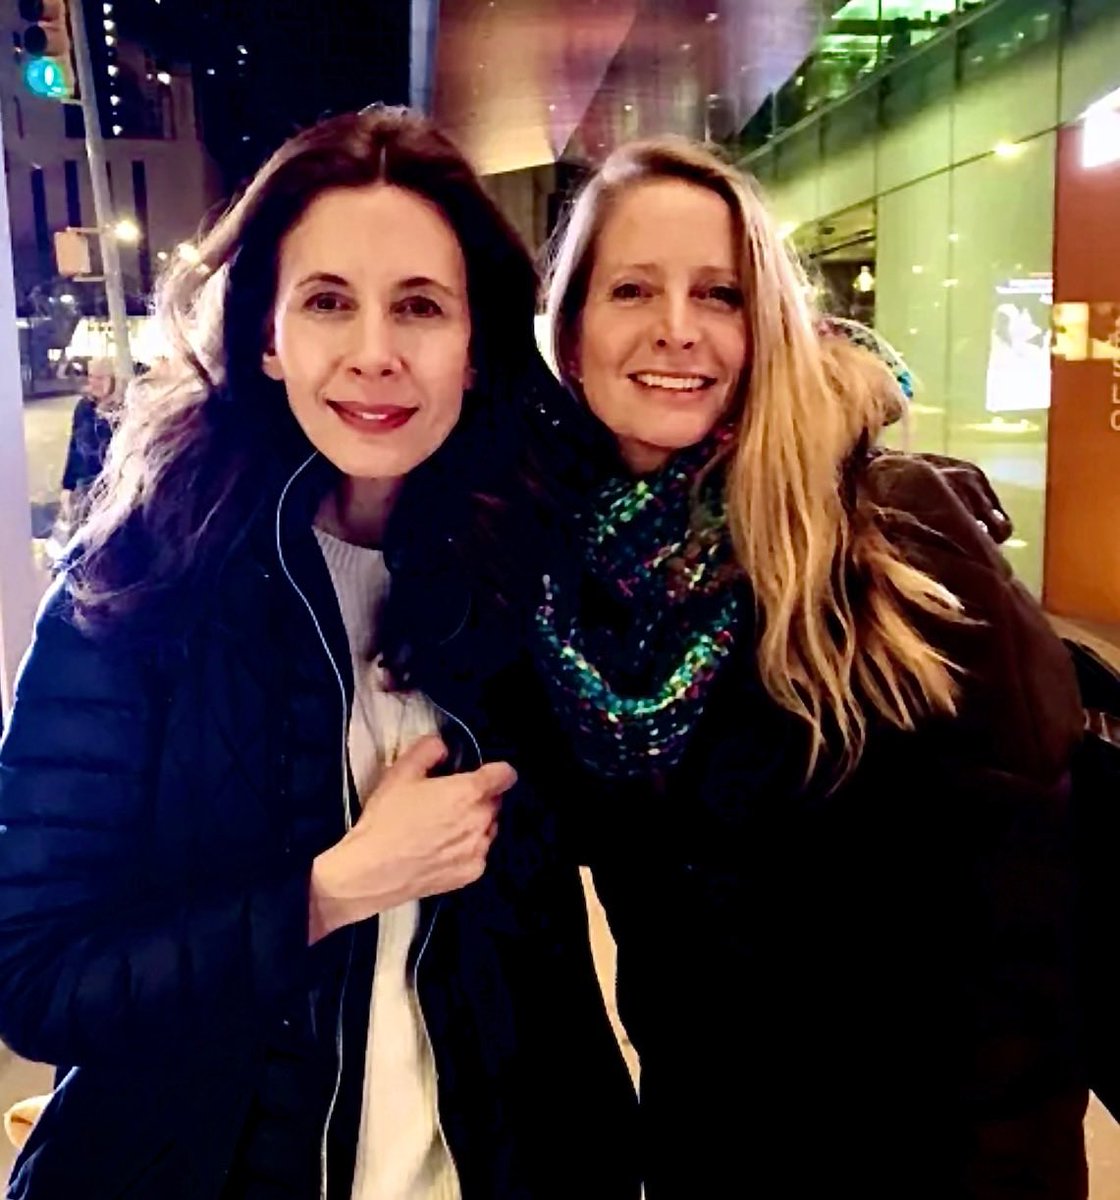 Carol and Susan are still together!
The lovely Jane Sibbett posted this pic of her ‘mini reunion’ with her “wife” Broadway star, Jessica Hecht in London. @FriendsTV